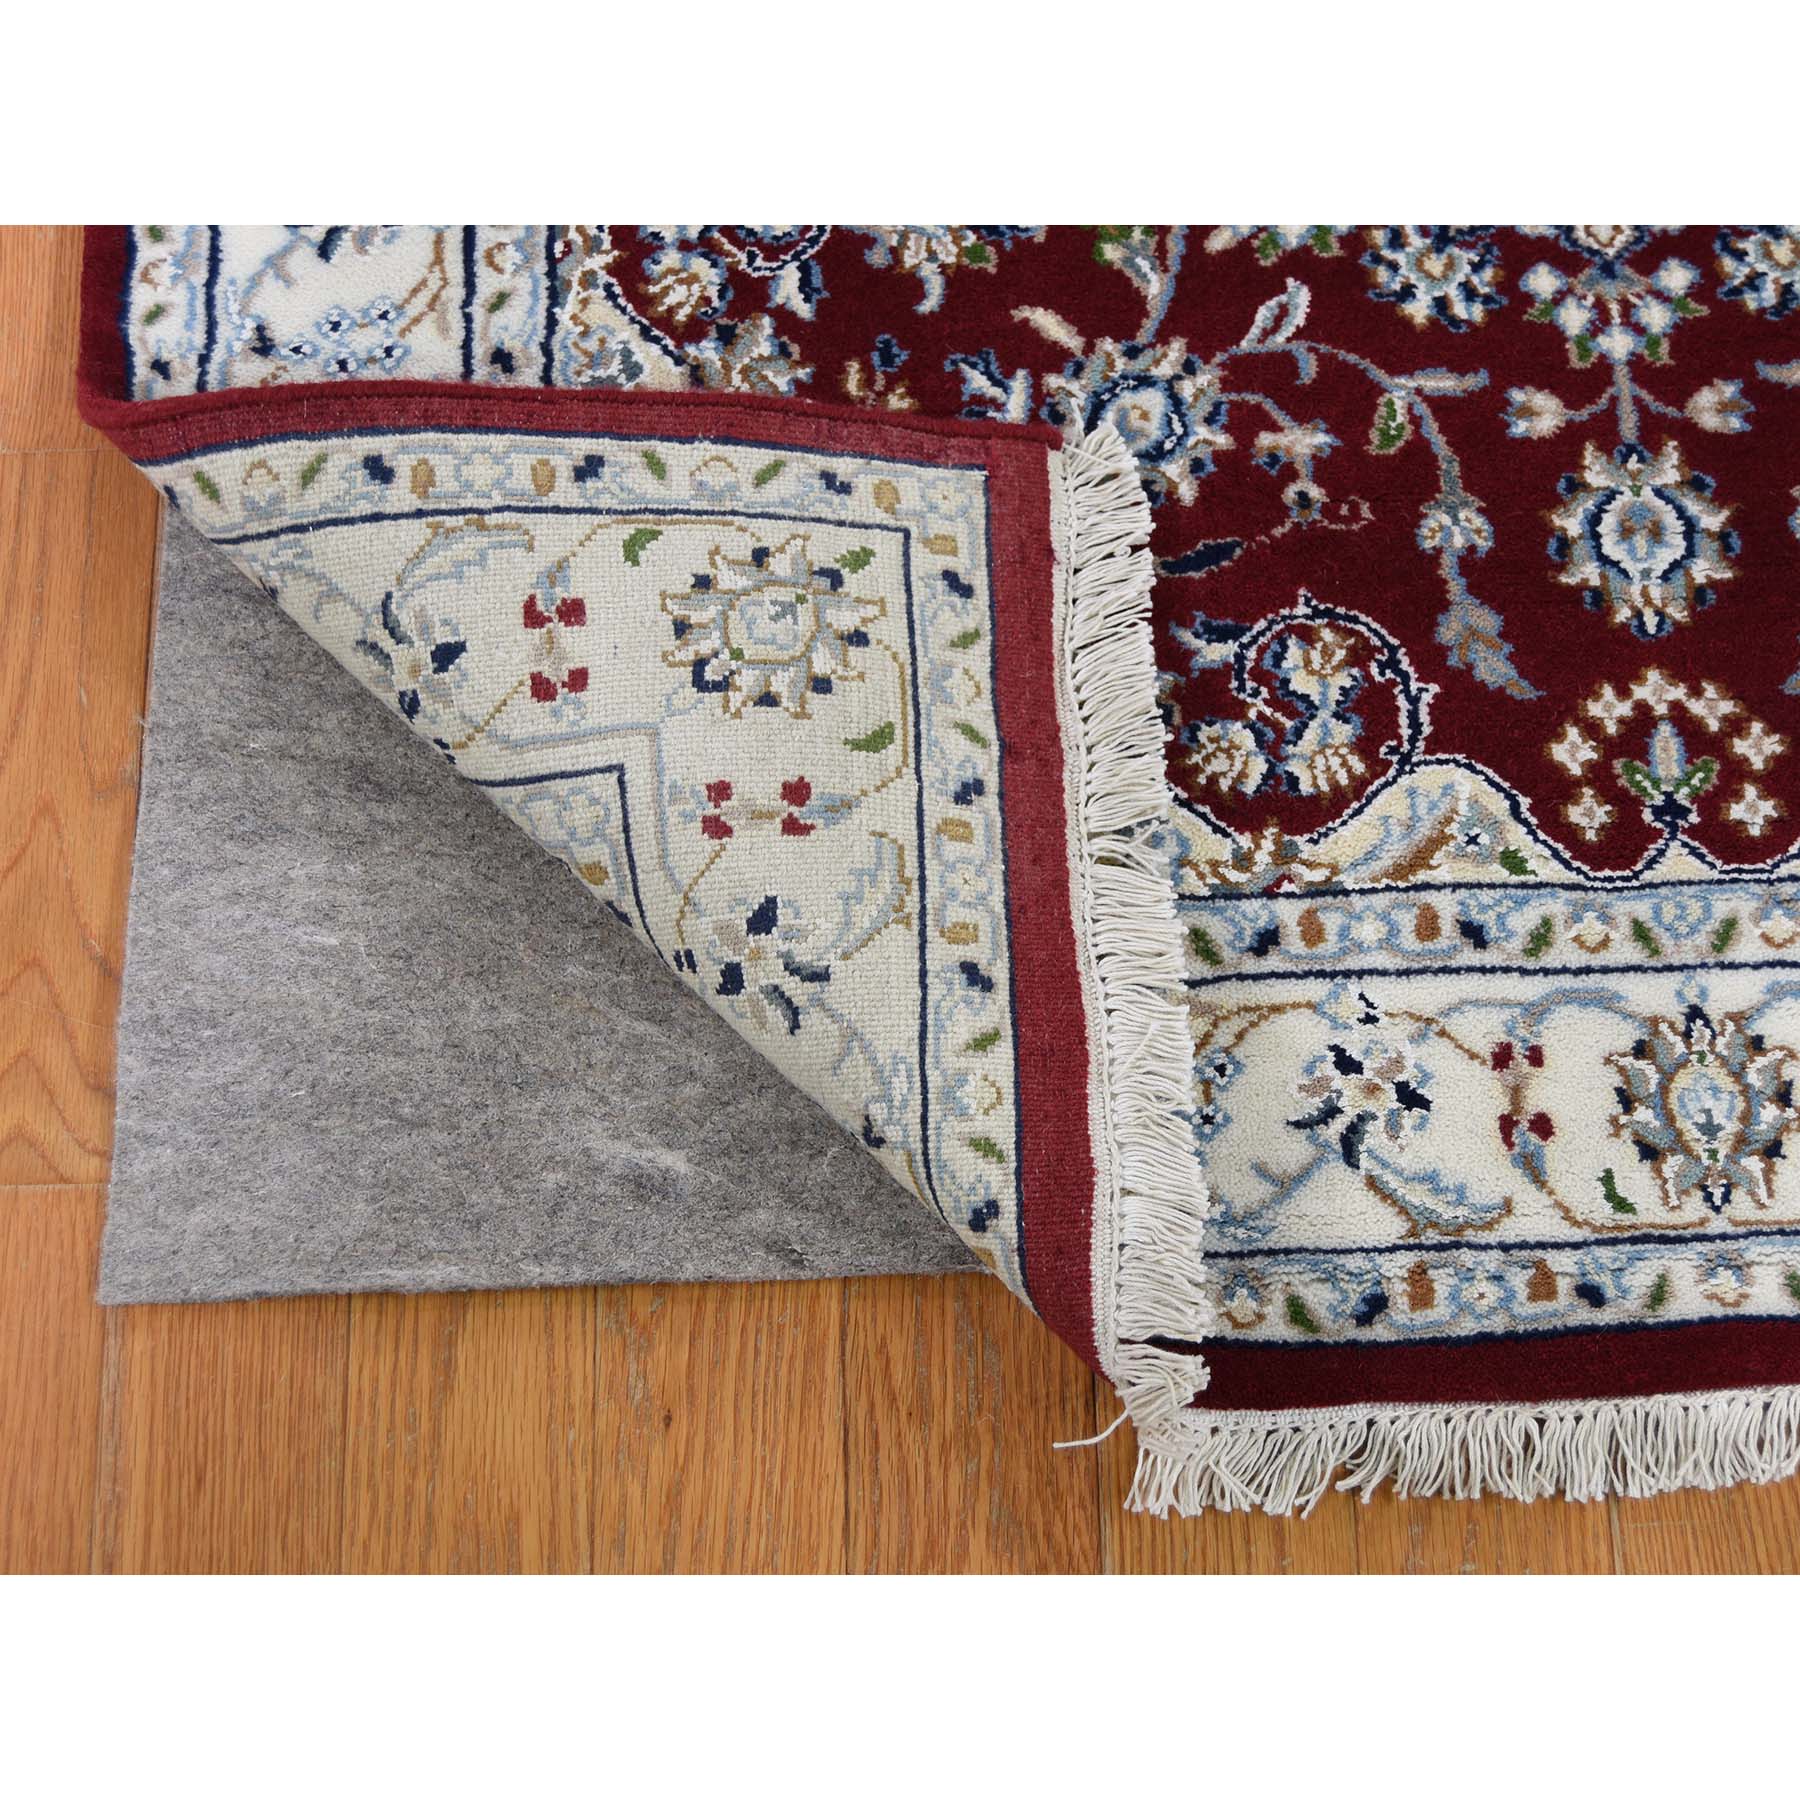 3-10 x3-10  Wool And Silk 250 Kpsi Red Square Nain Hand-Knotted Oriental Rug 